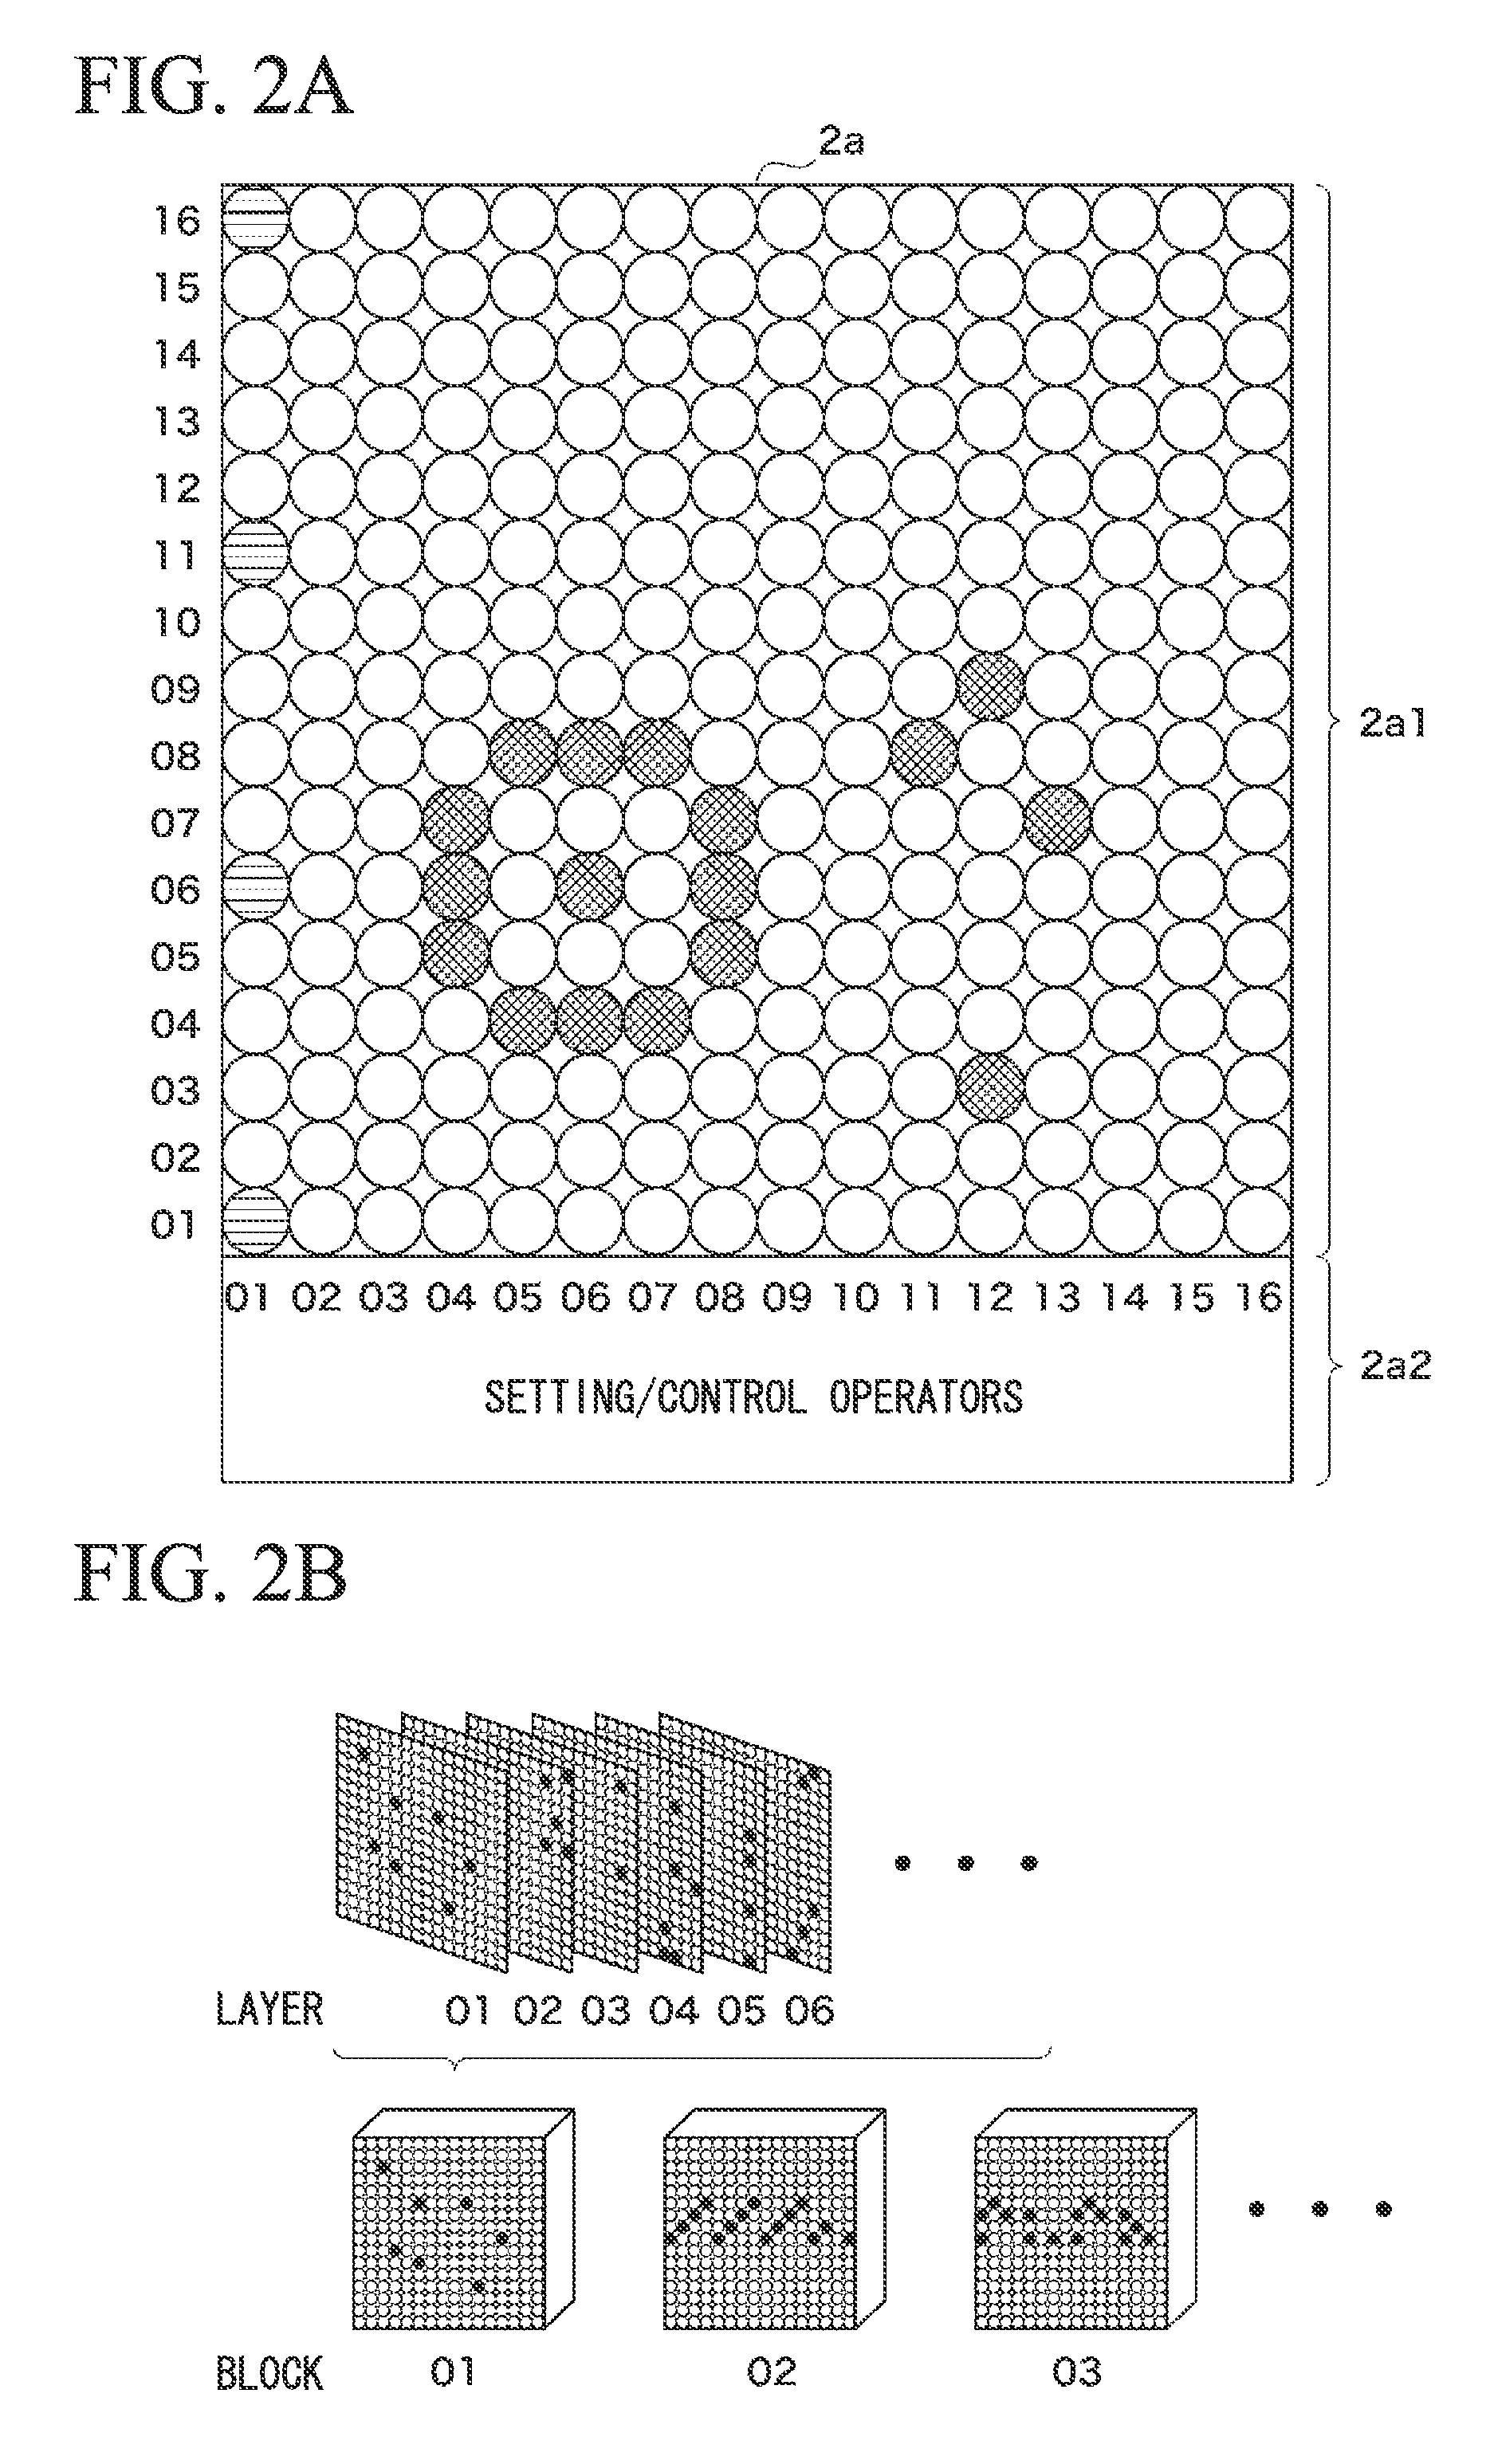 Online real-time session control method for electronic music device